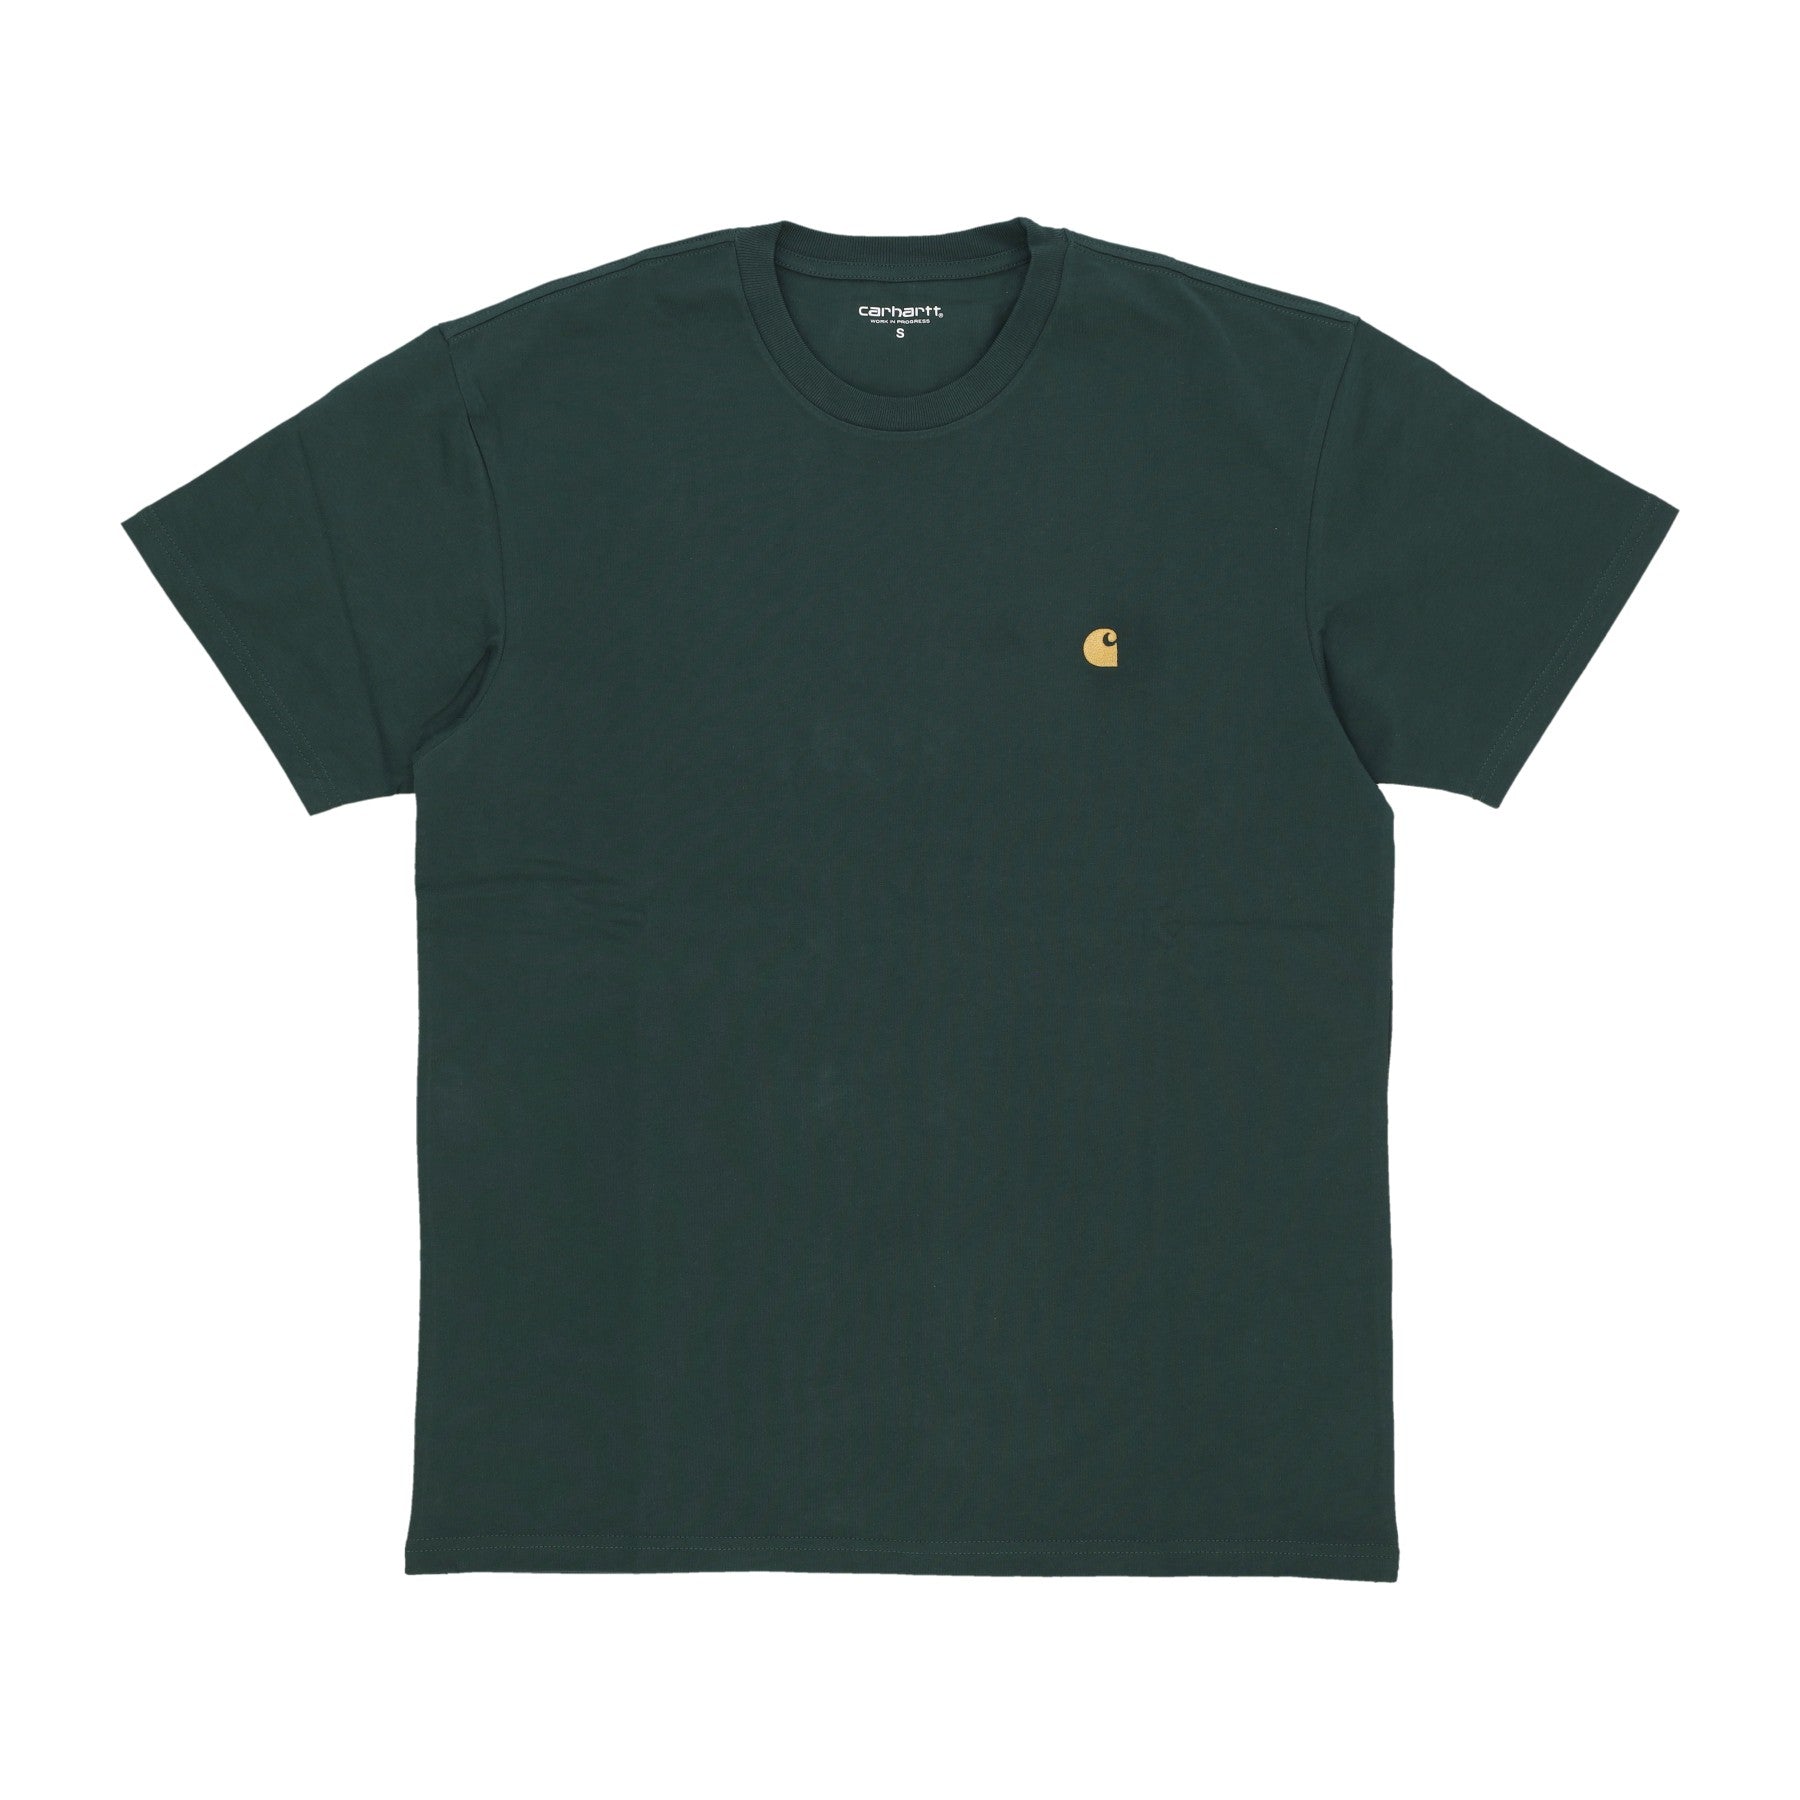 Maglietta Uomo Chase T-shirt Discovery Green/gold I026391